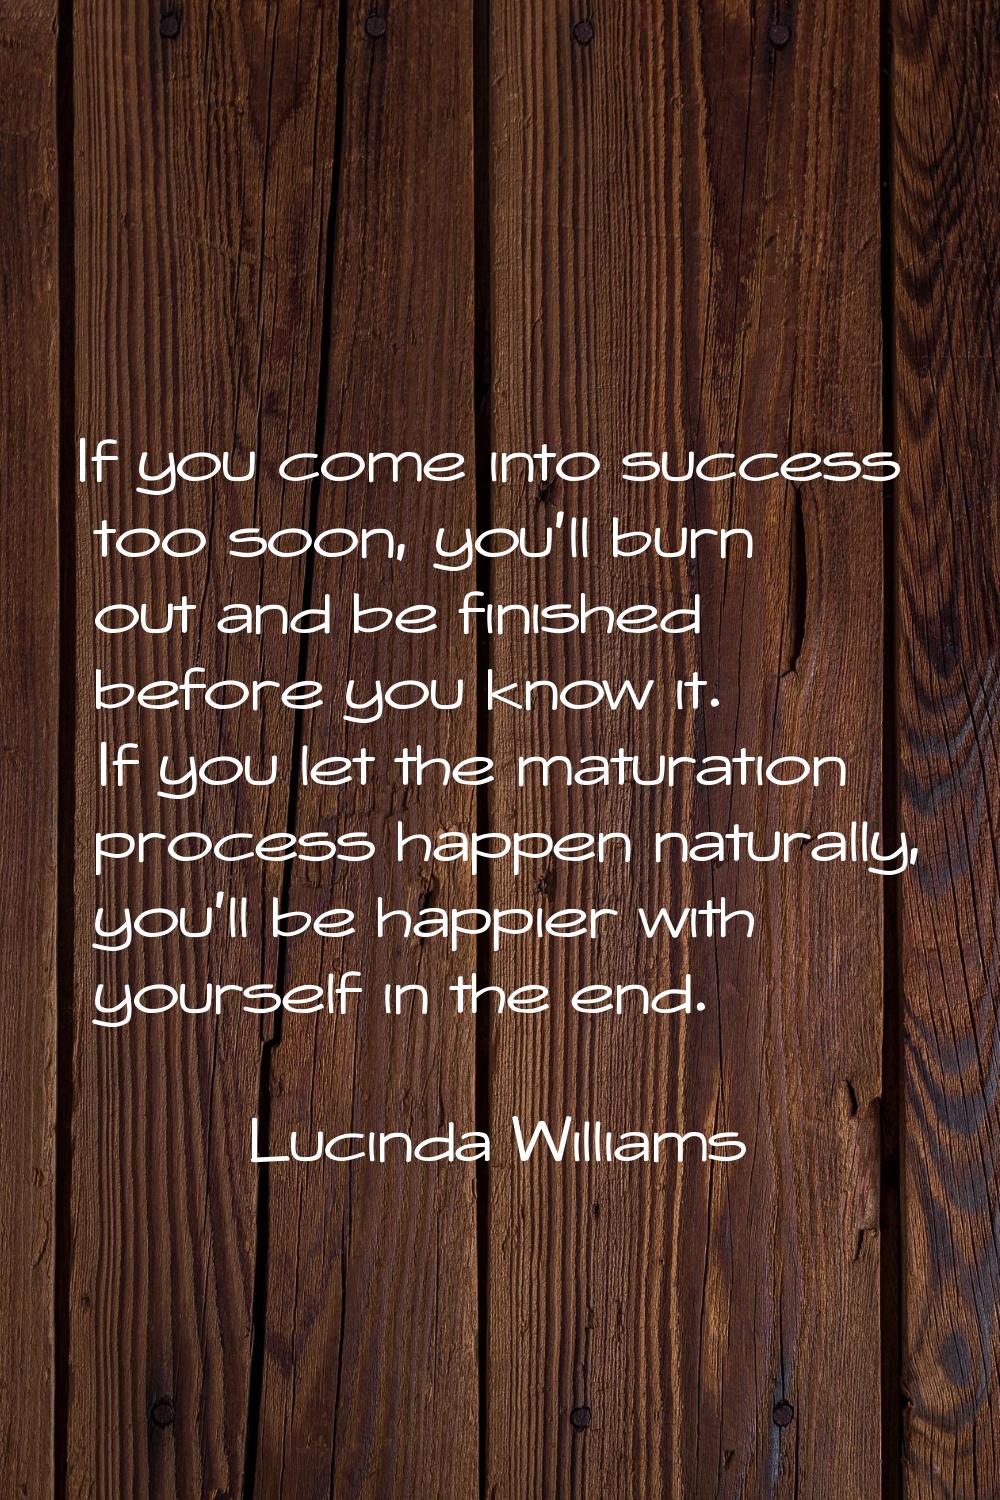 If you come into success too soon, you'll burn out and be finished before you know it. If you let t